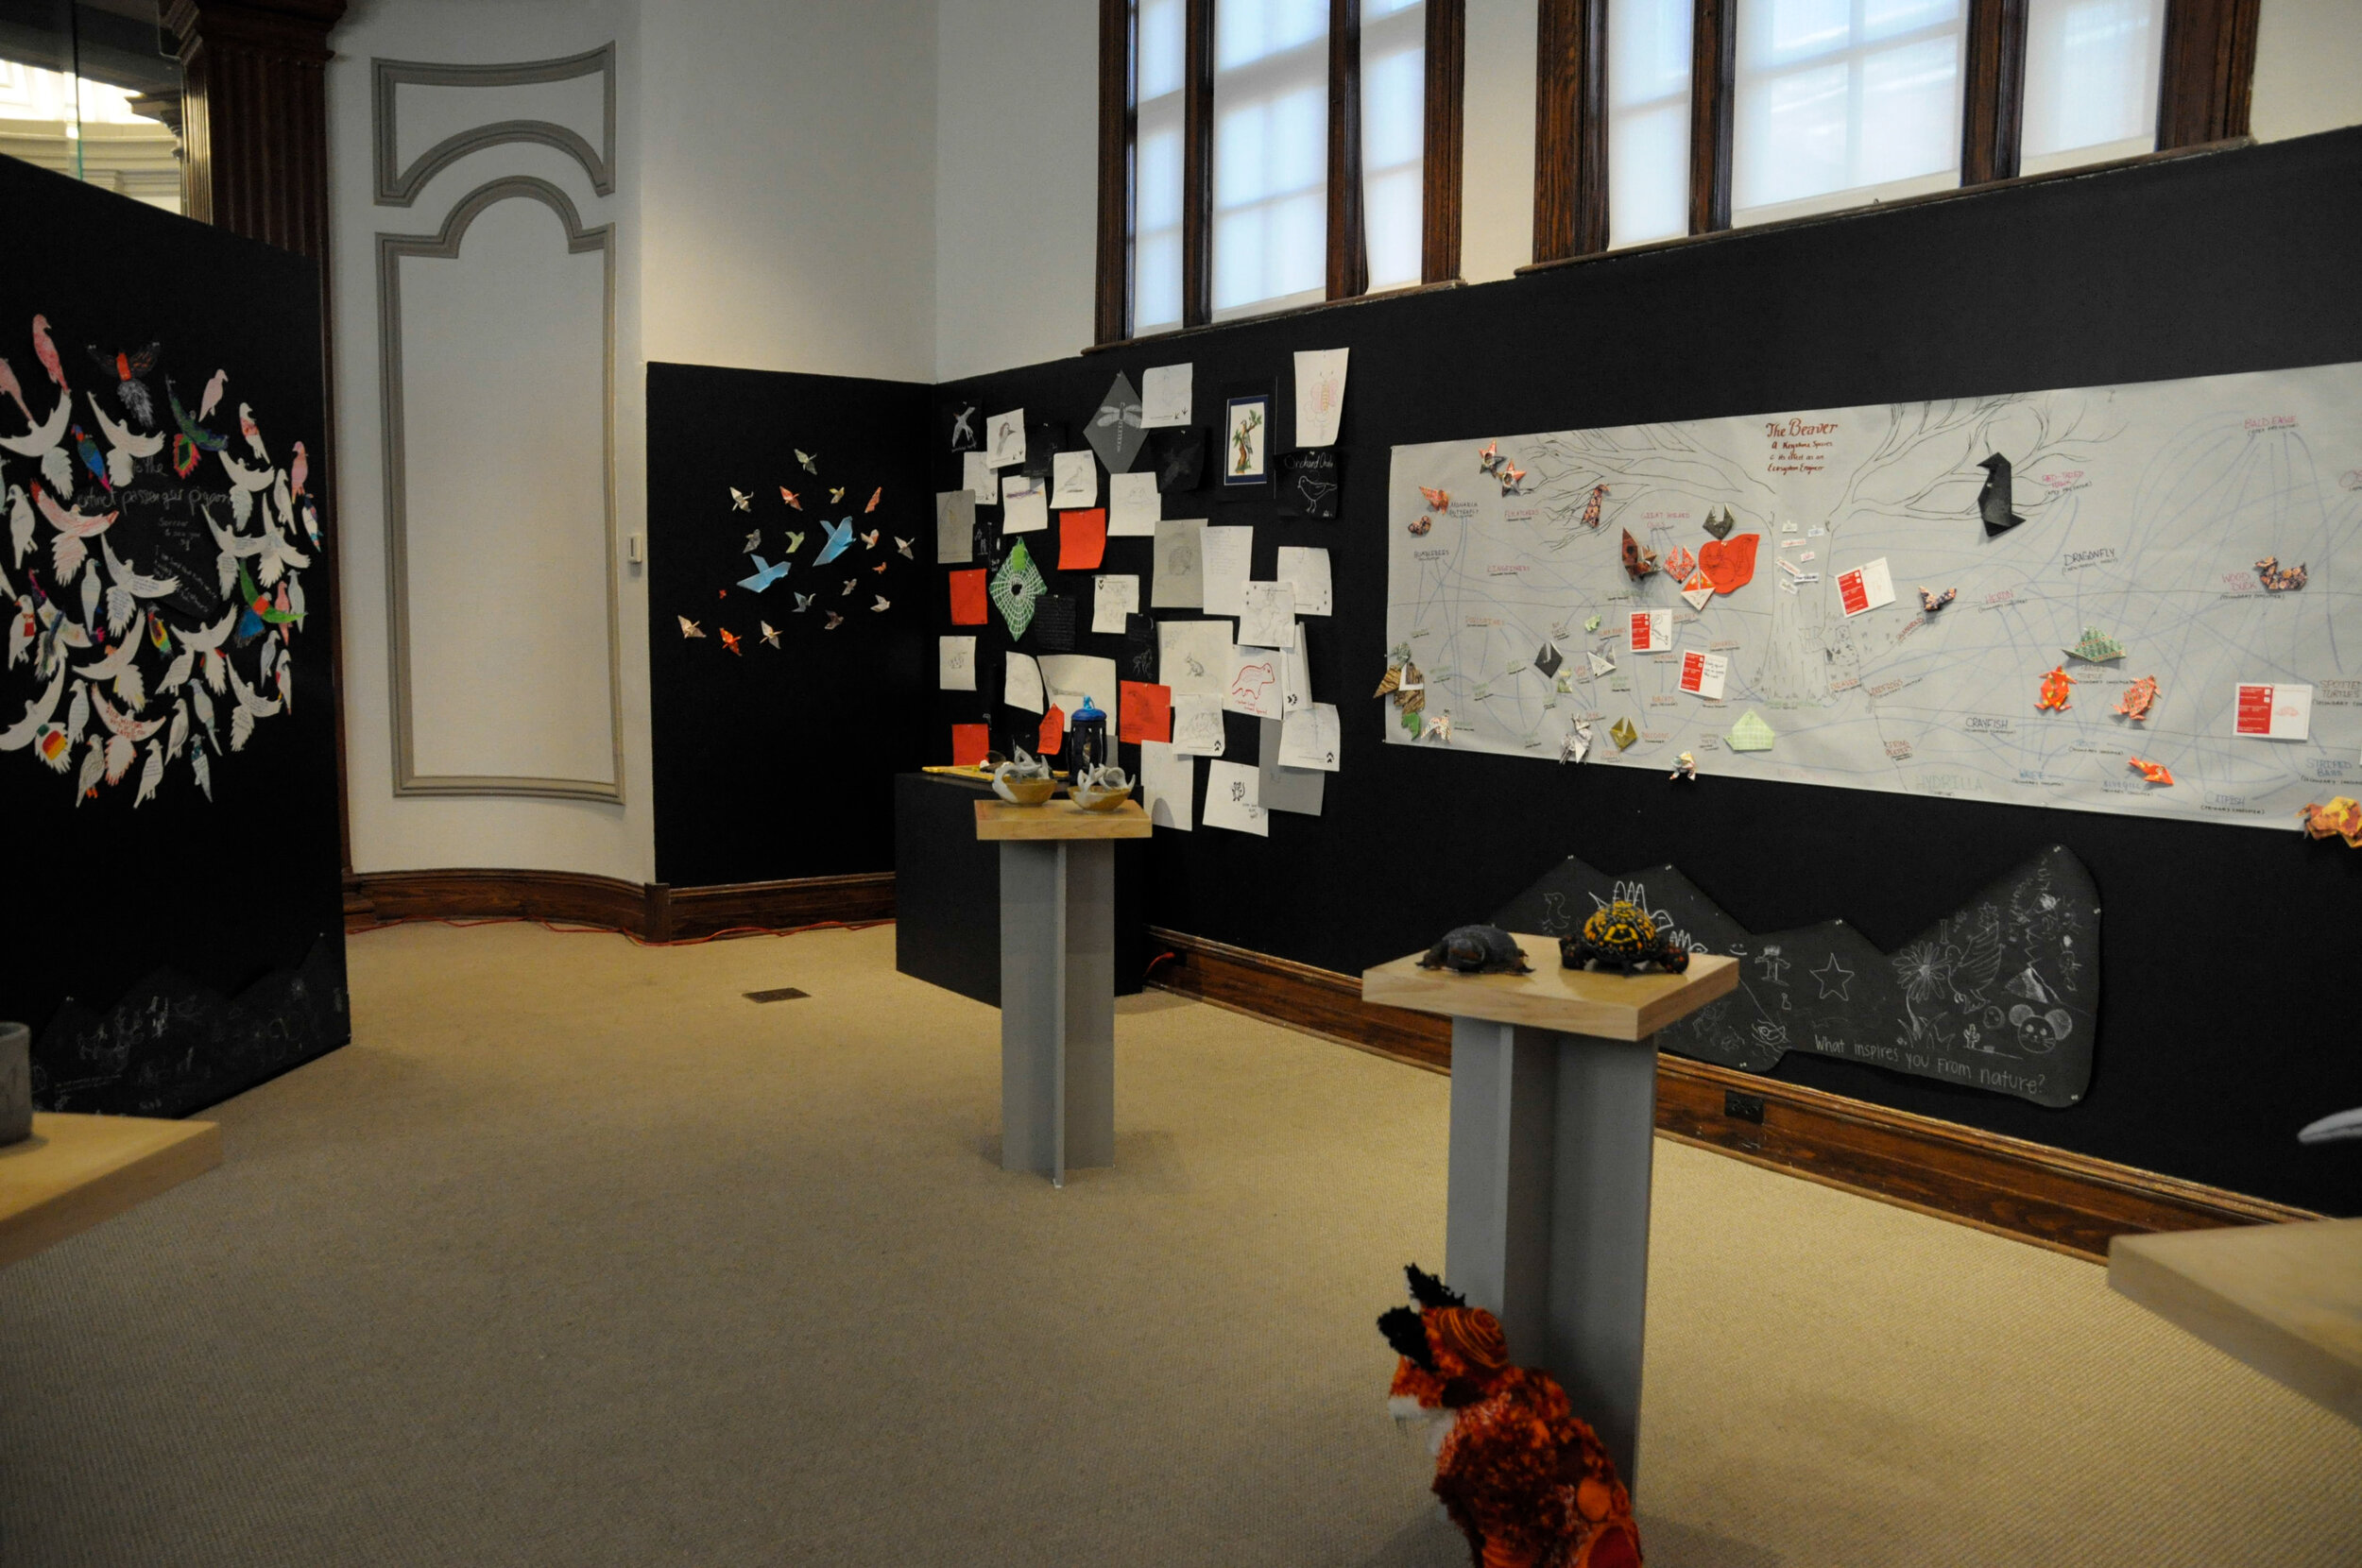   In the Fabric of the Woodland , Installation view: Community Response, Shoemaker Gallery, Juniata College Museum of Art, Huntingdon, Pennsylvania, 2019  Photo Credit: Verónica Cosmópolis 